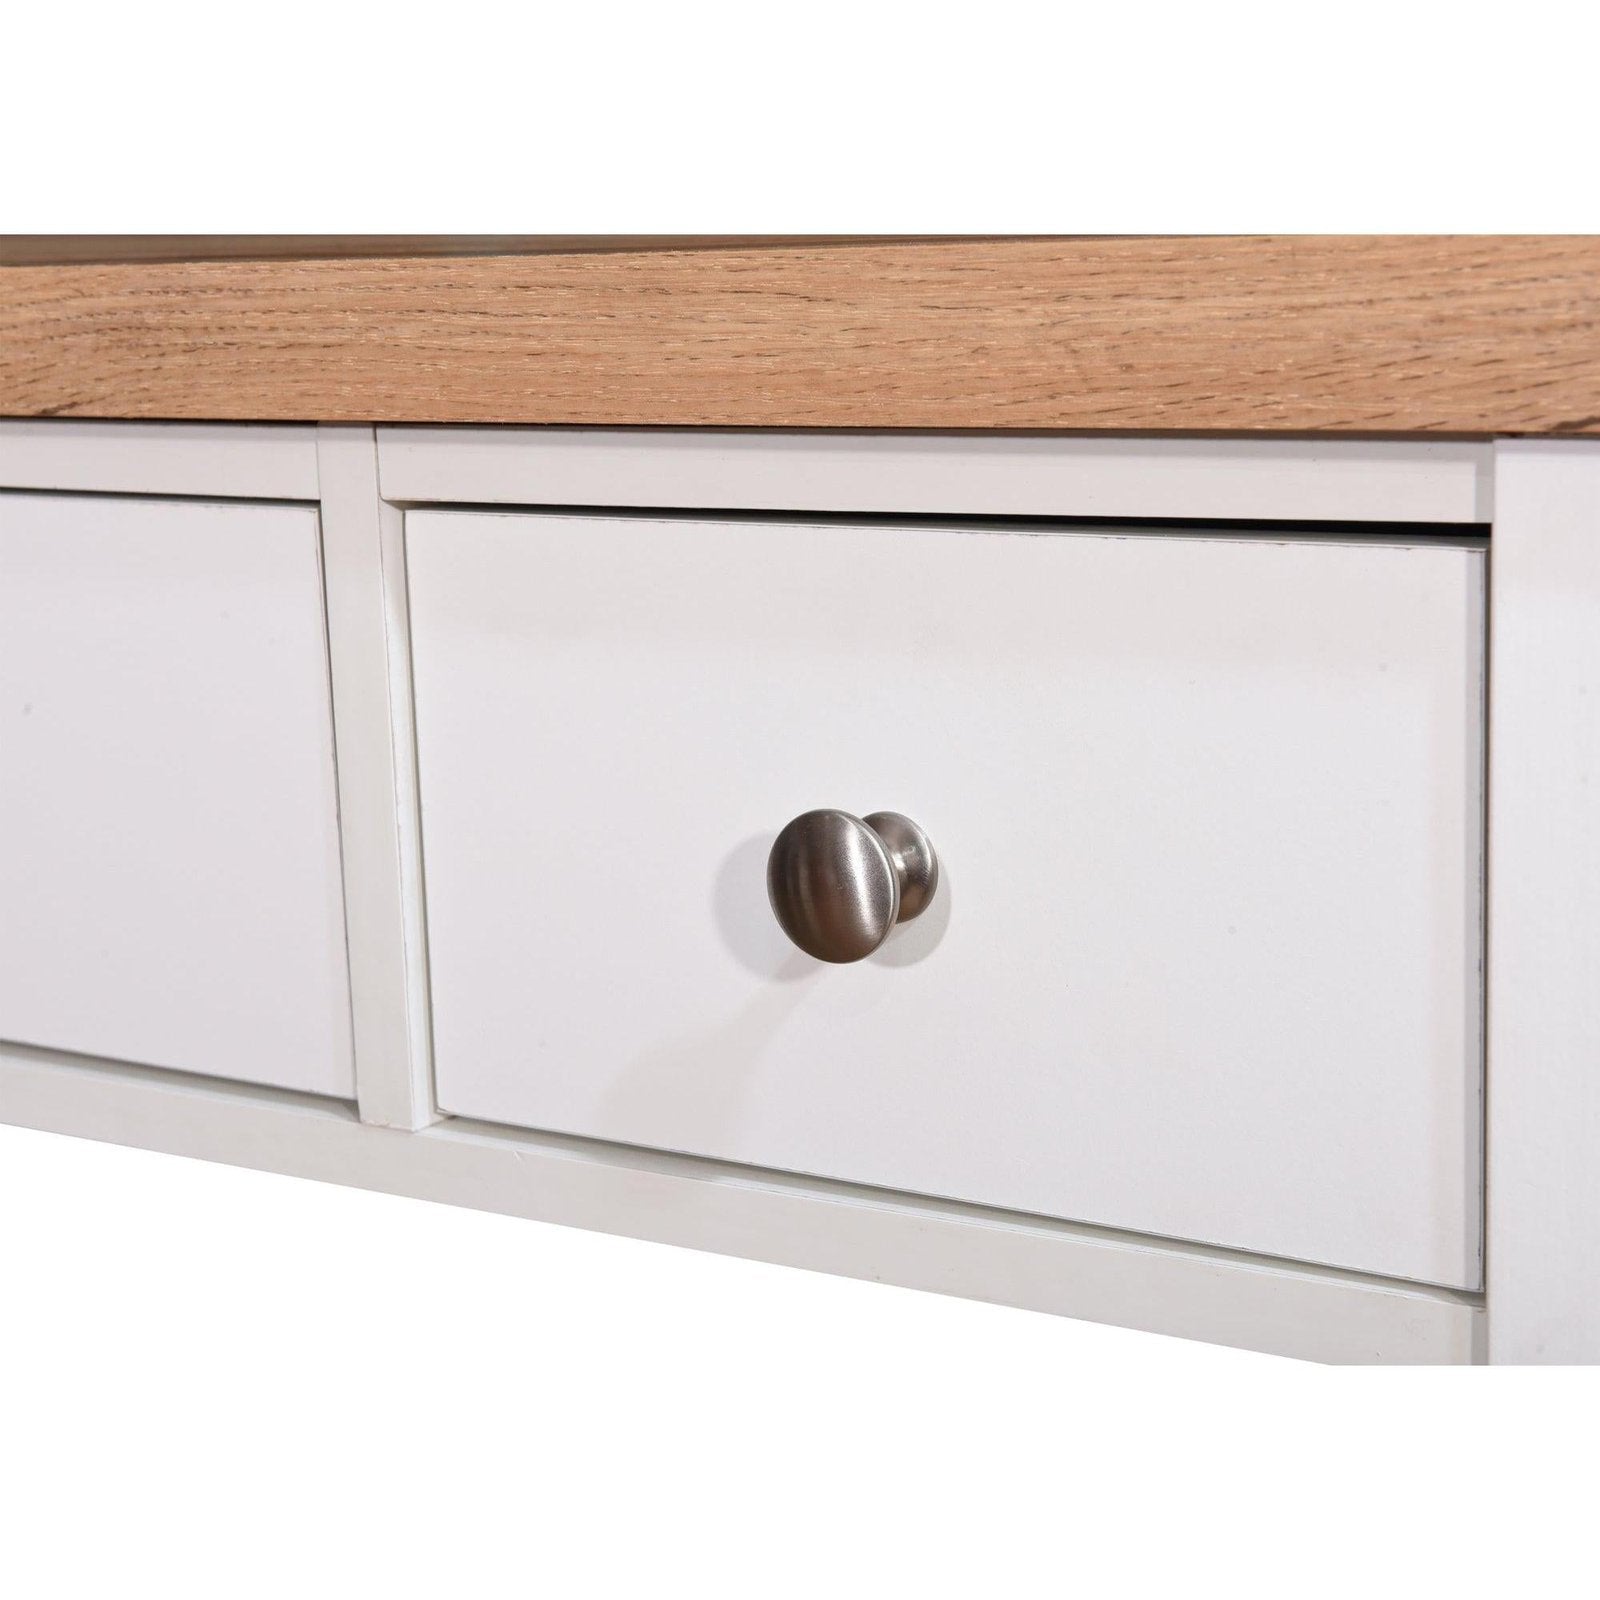 Astbury Dressing Table with 3 Drawers in White & Oak